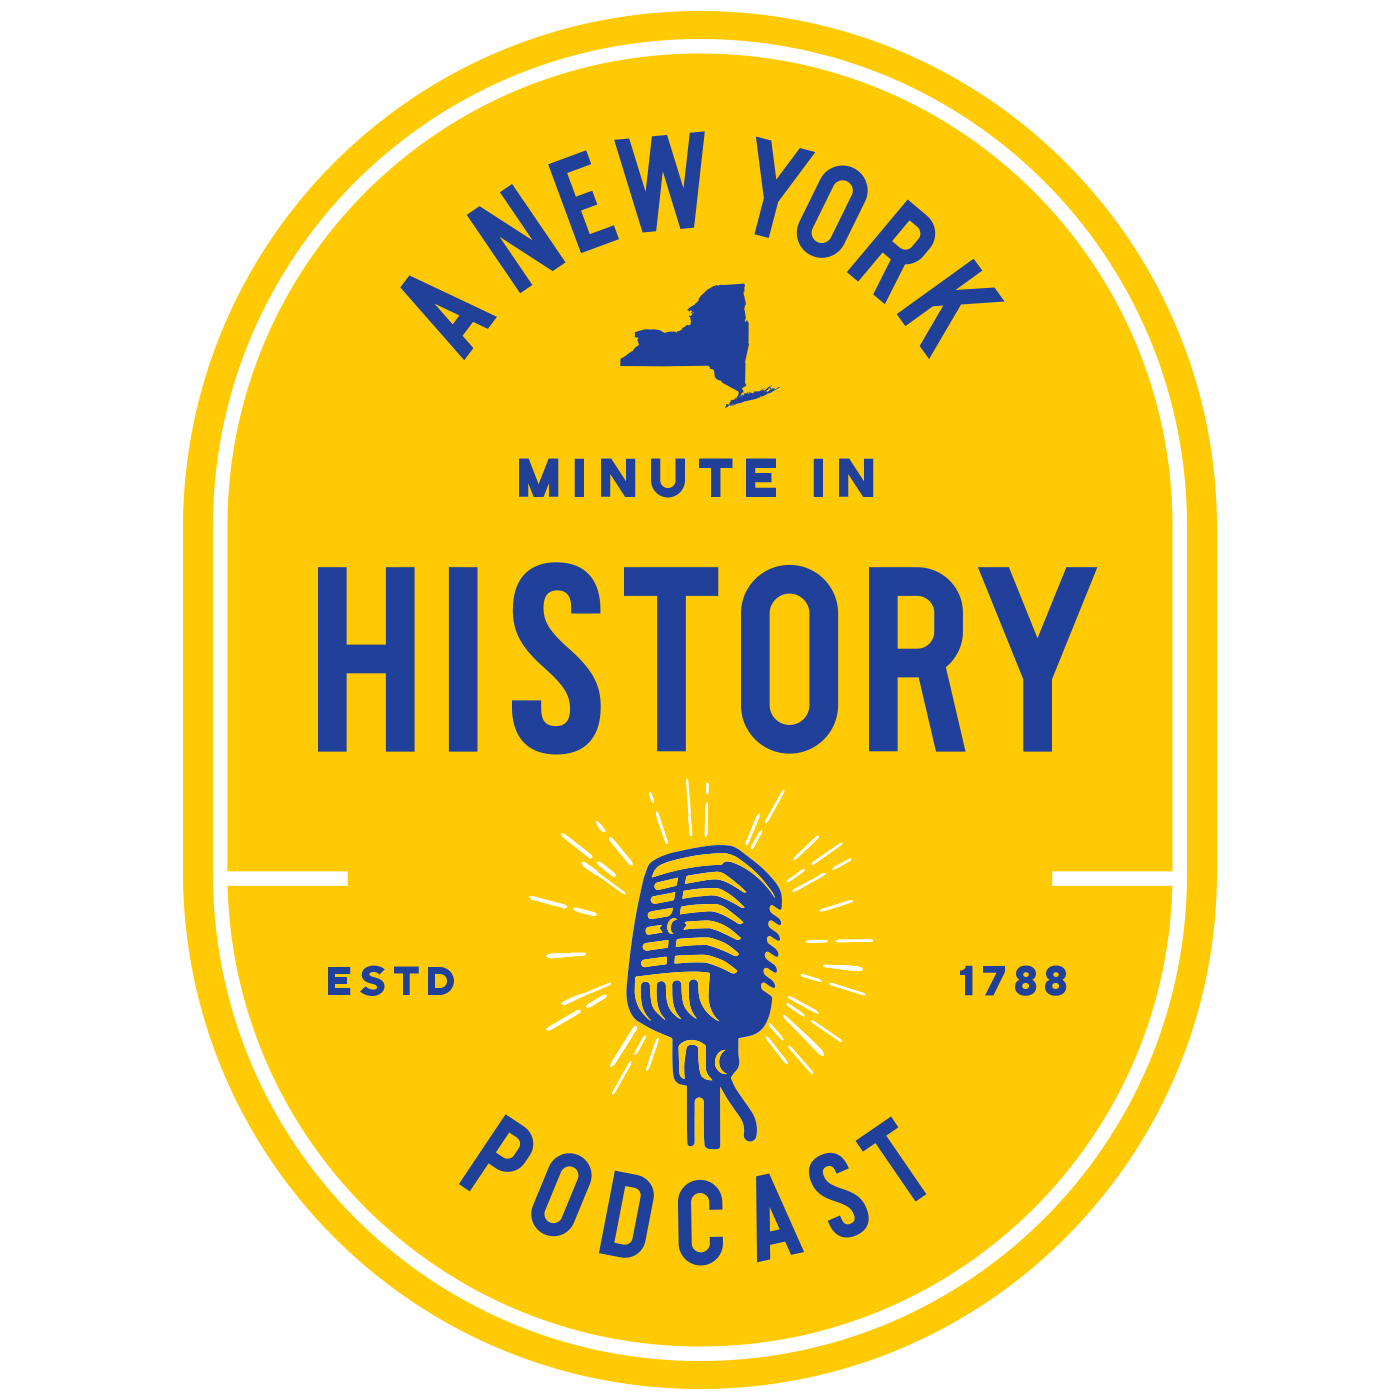 Preparing for the 250th | A New York Minute in History